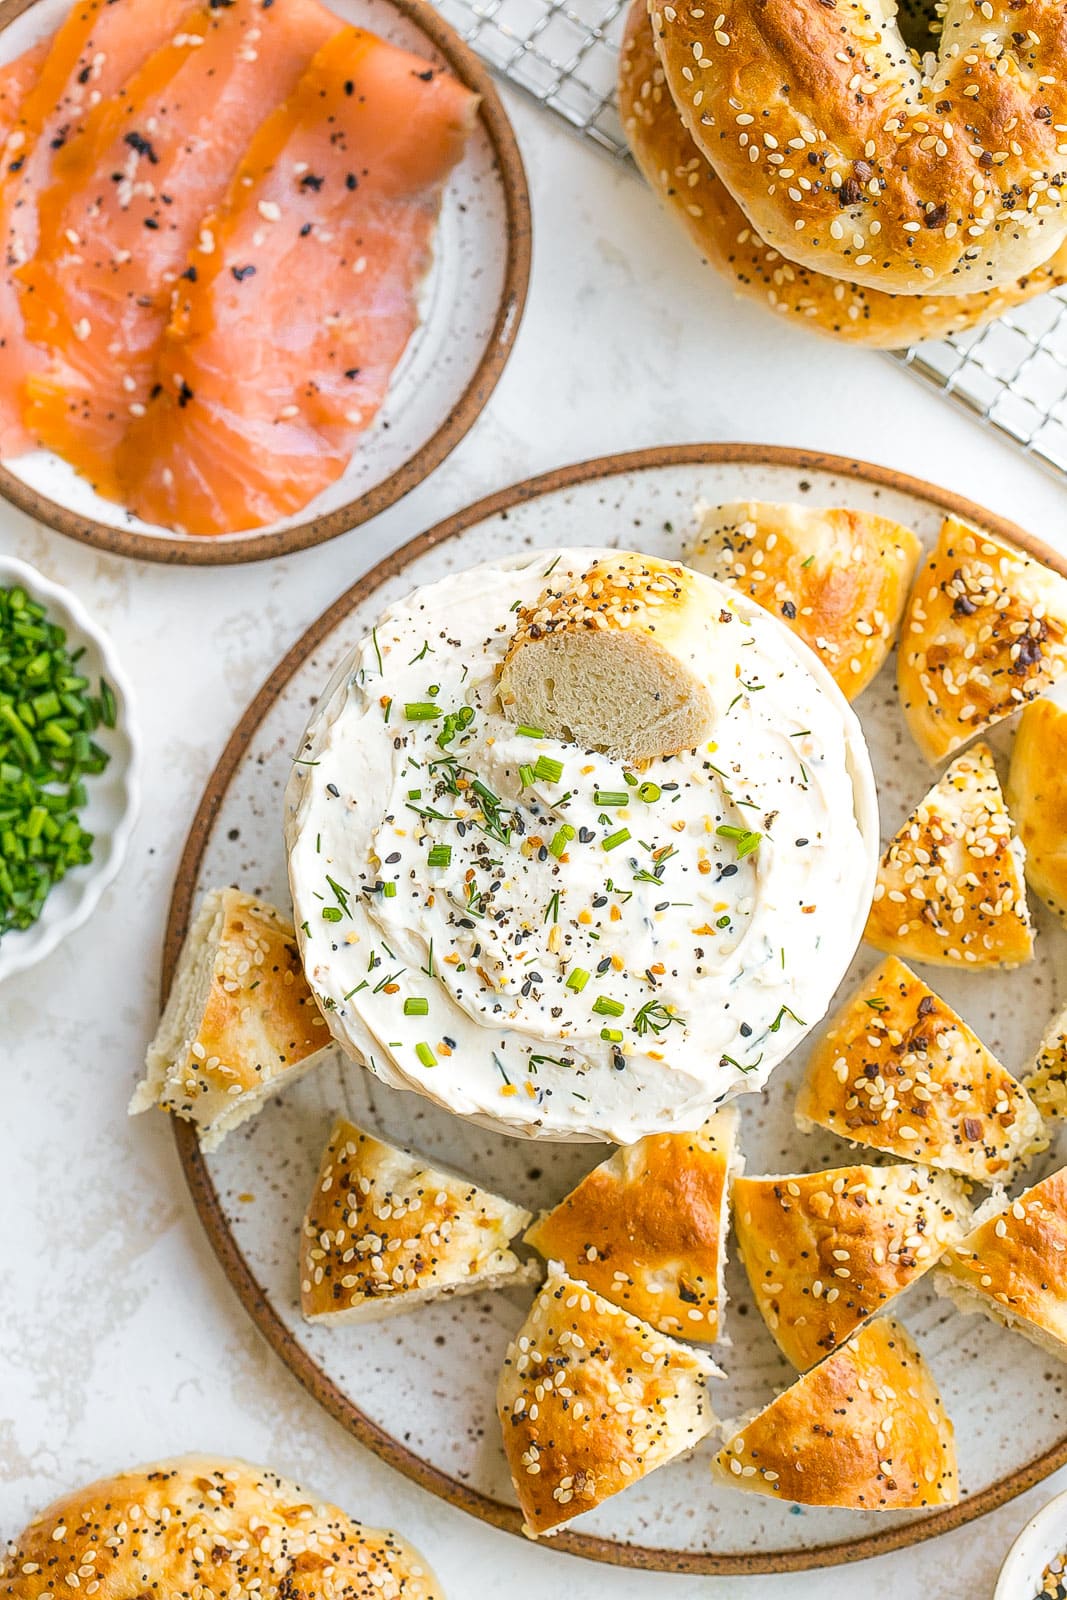 Smoked salmon, dip, and bagels.